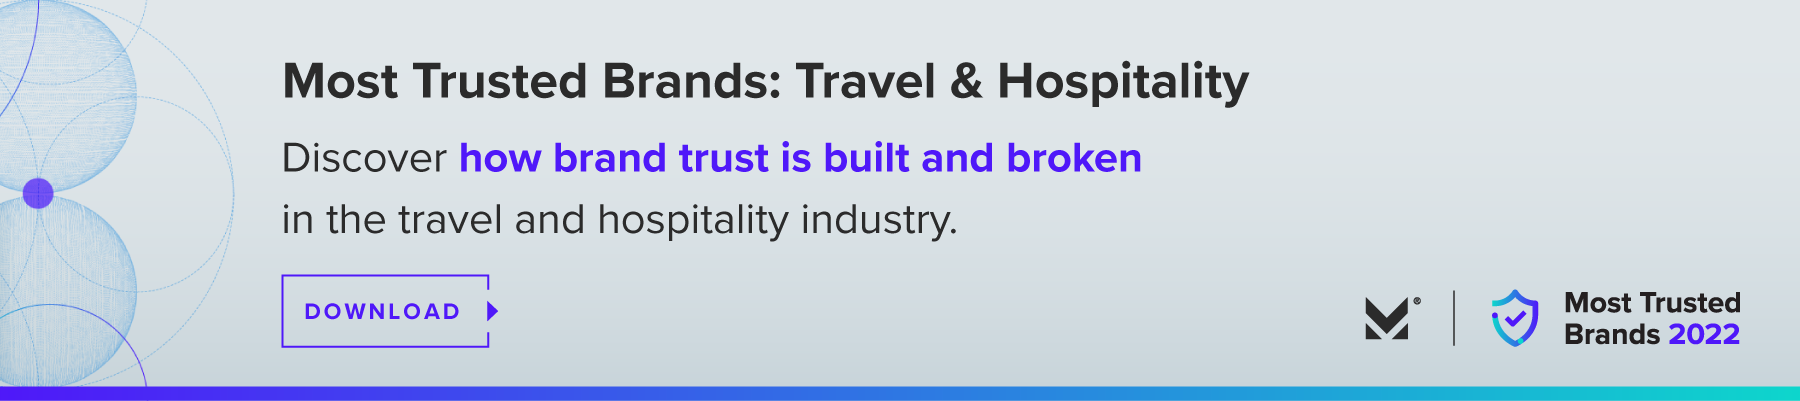 Morning Consult Most Trusted Brands 2022: Travel & Hospitality Report Download